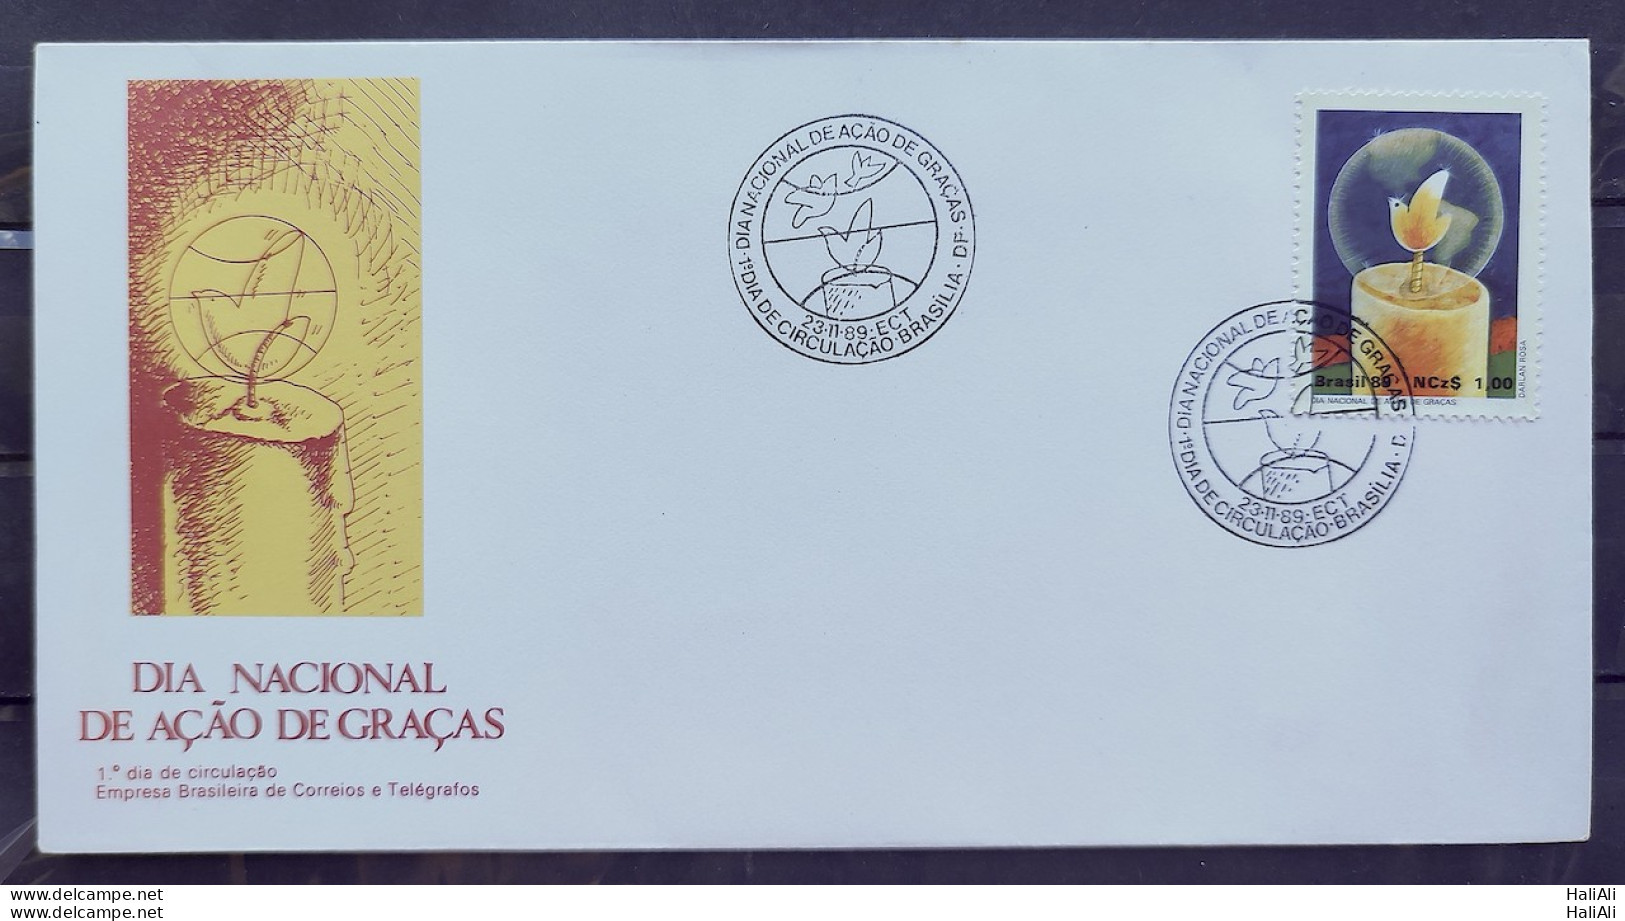 Brazil Envelope FDC 486 1989 CBC BSB 01 GRACAS ACTION DAY 01 - FDC